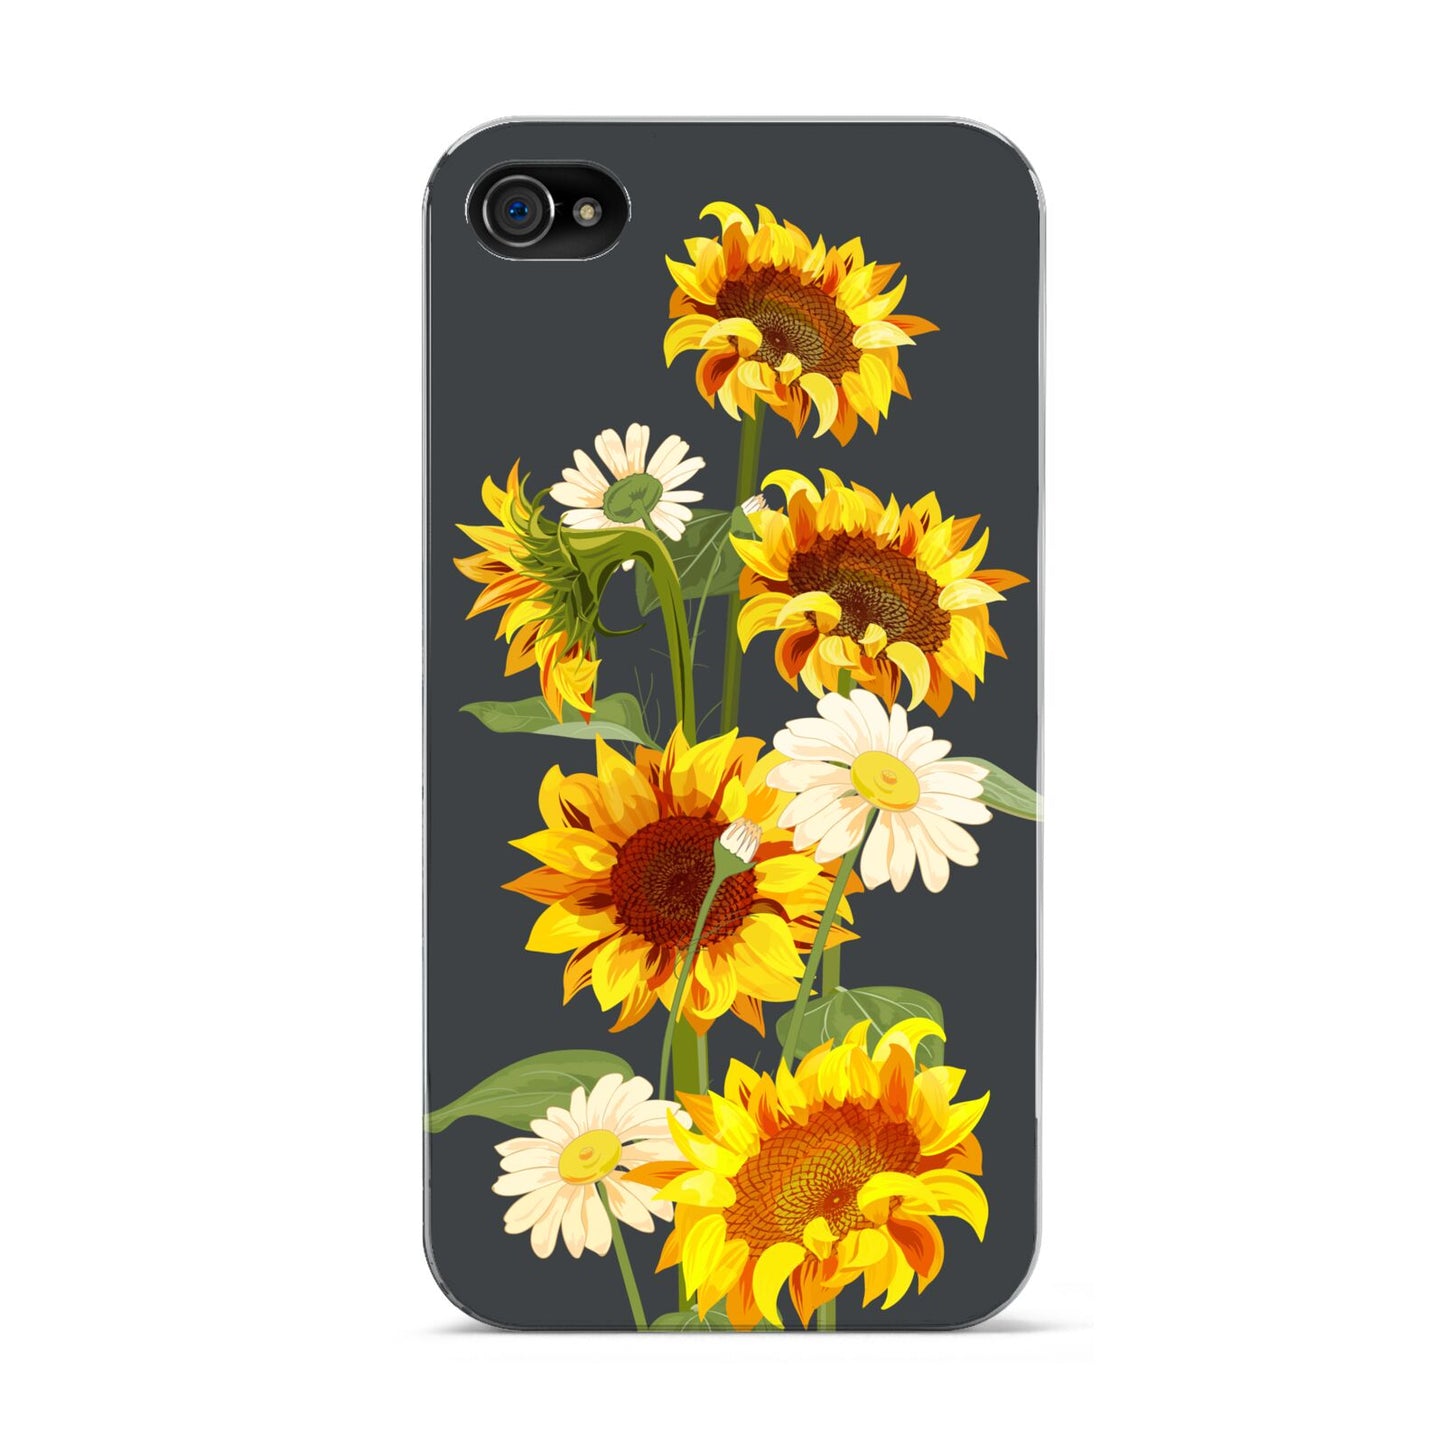 Sunflower Floral Apple iPhone 4s Case